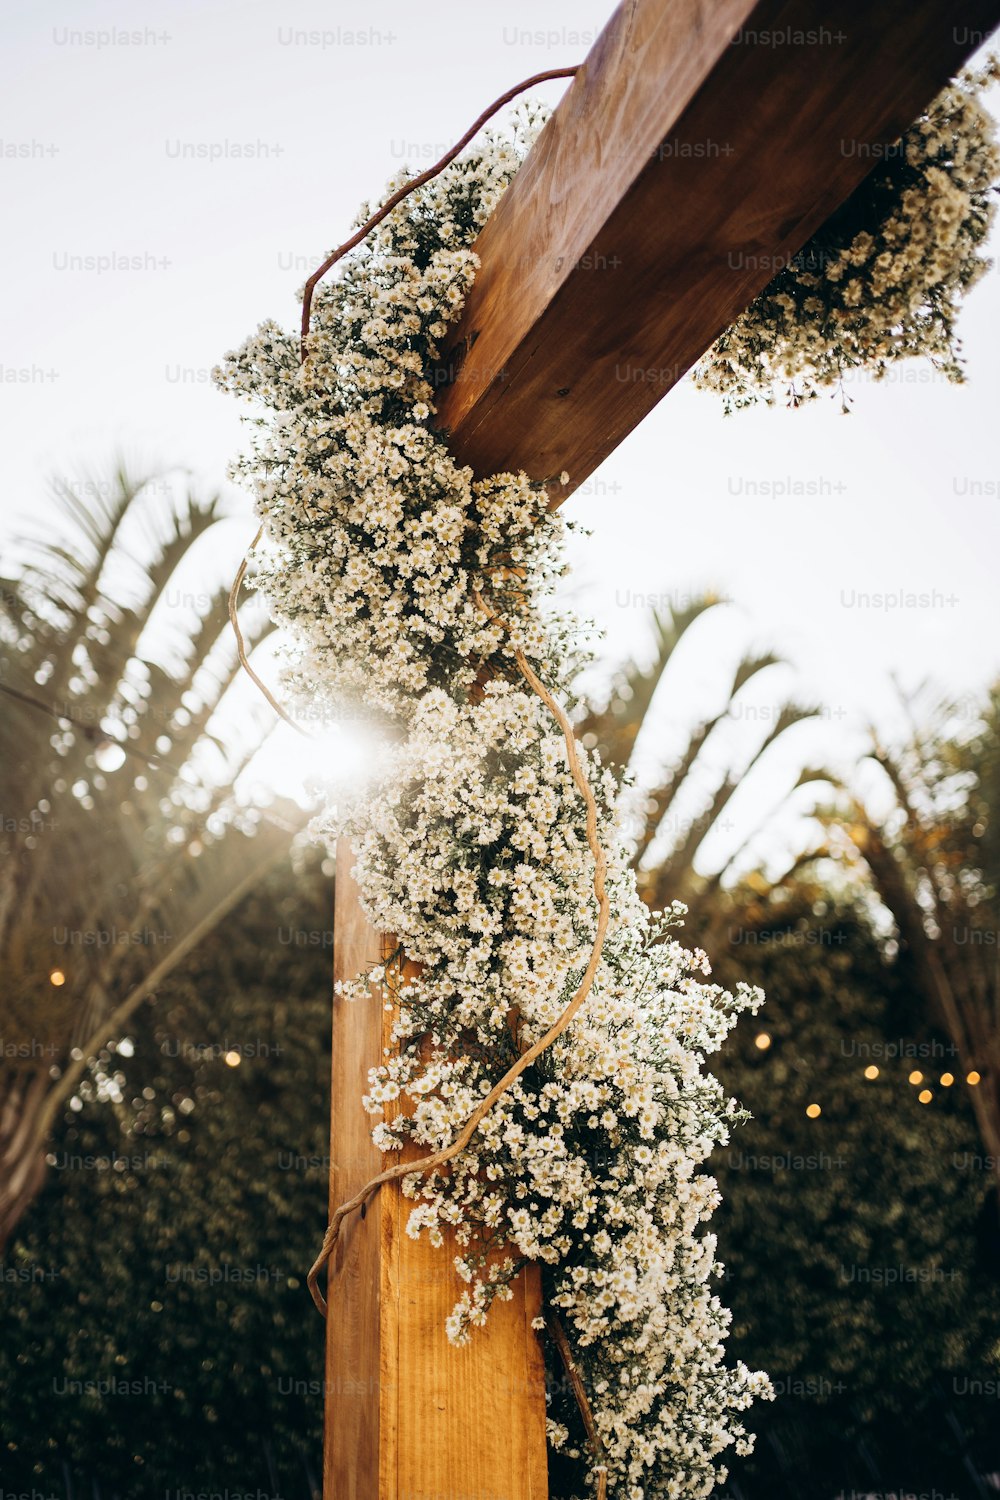 a wooden pole with a bunch of flowers on it